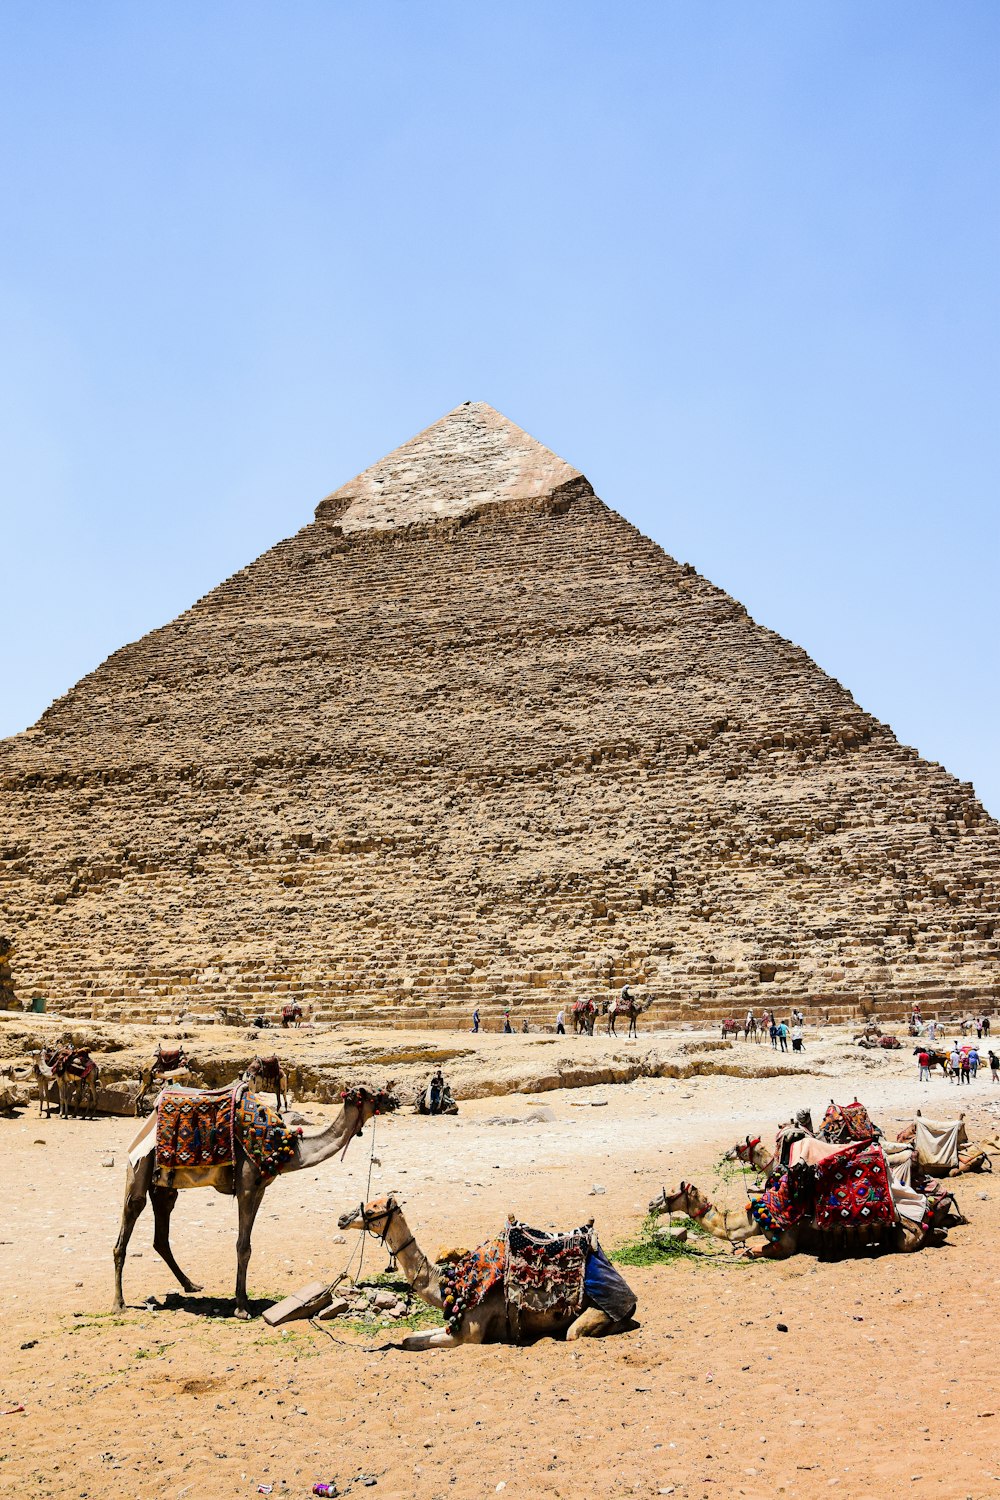 a camel is standing in front of a pyramid